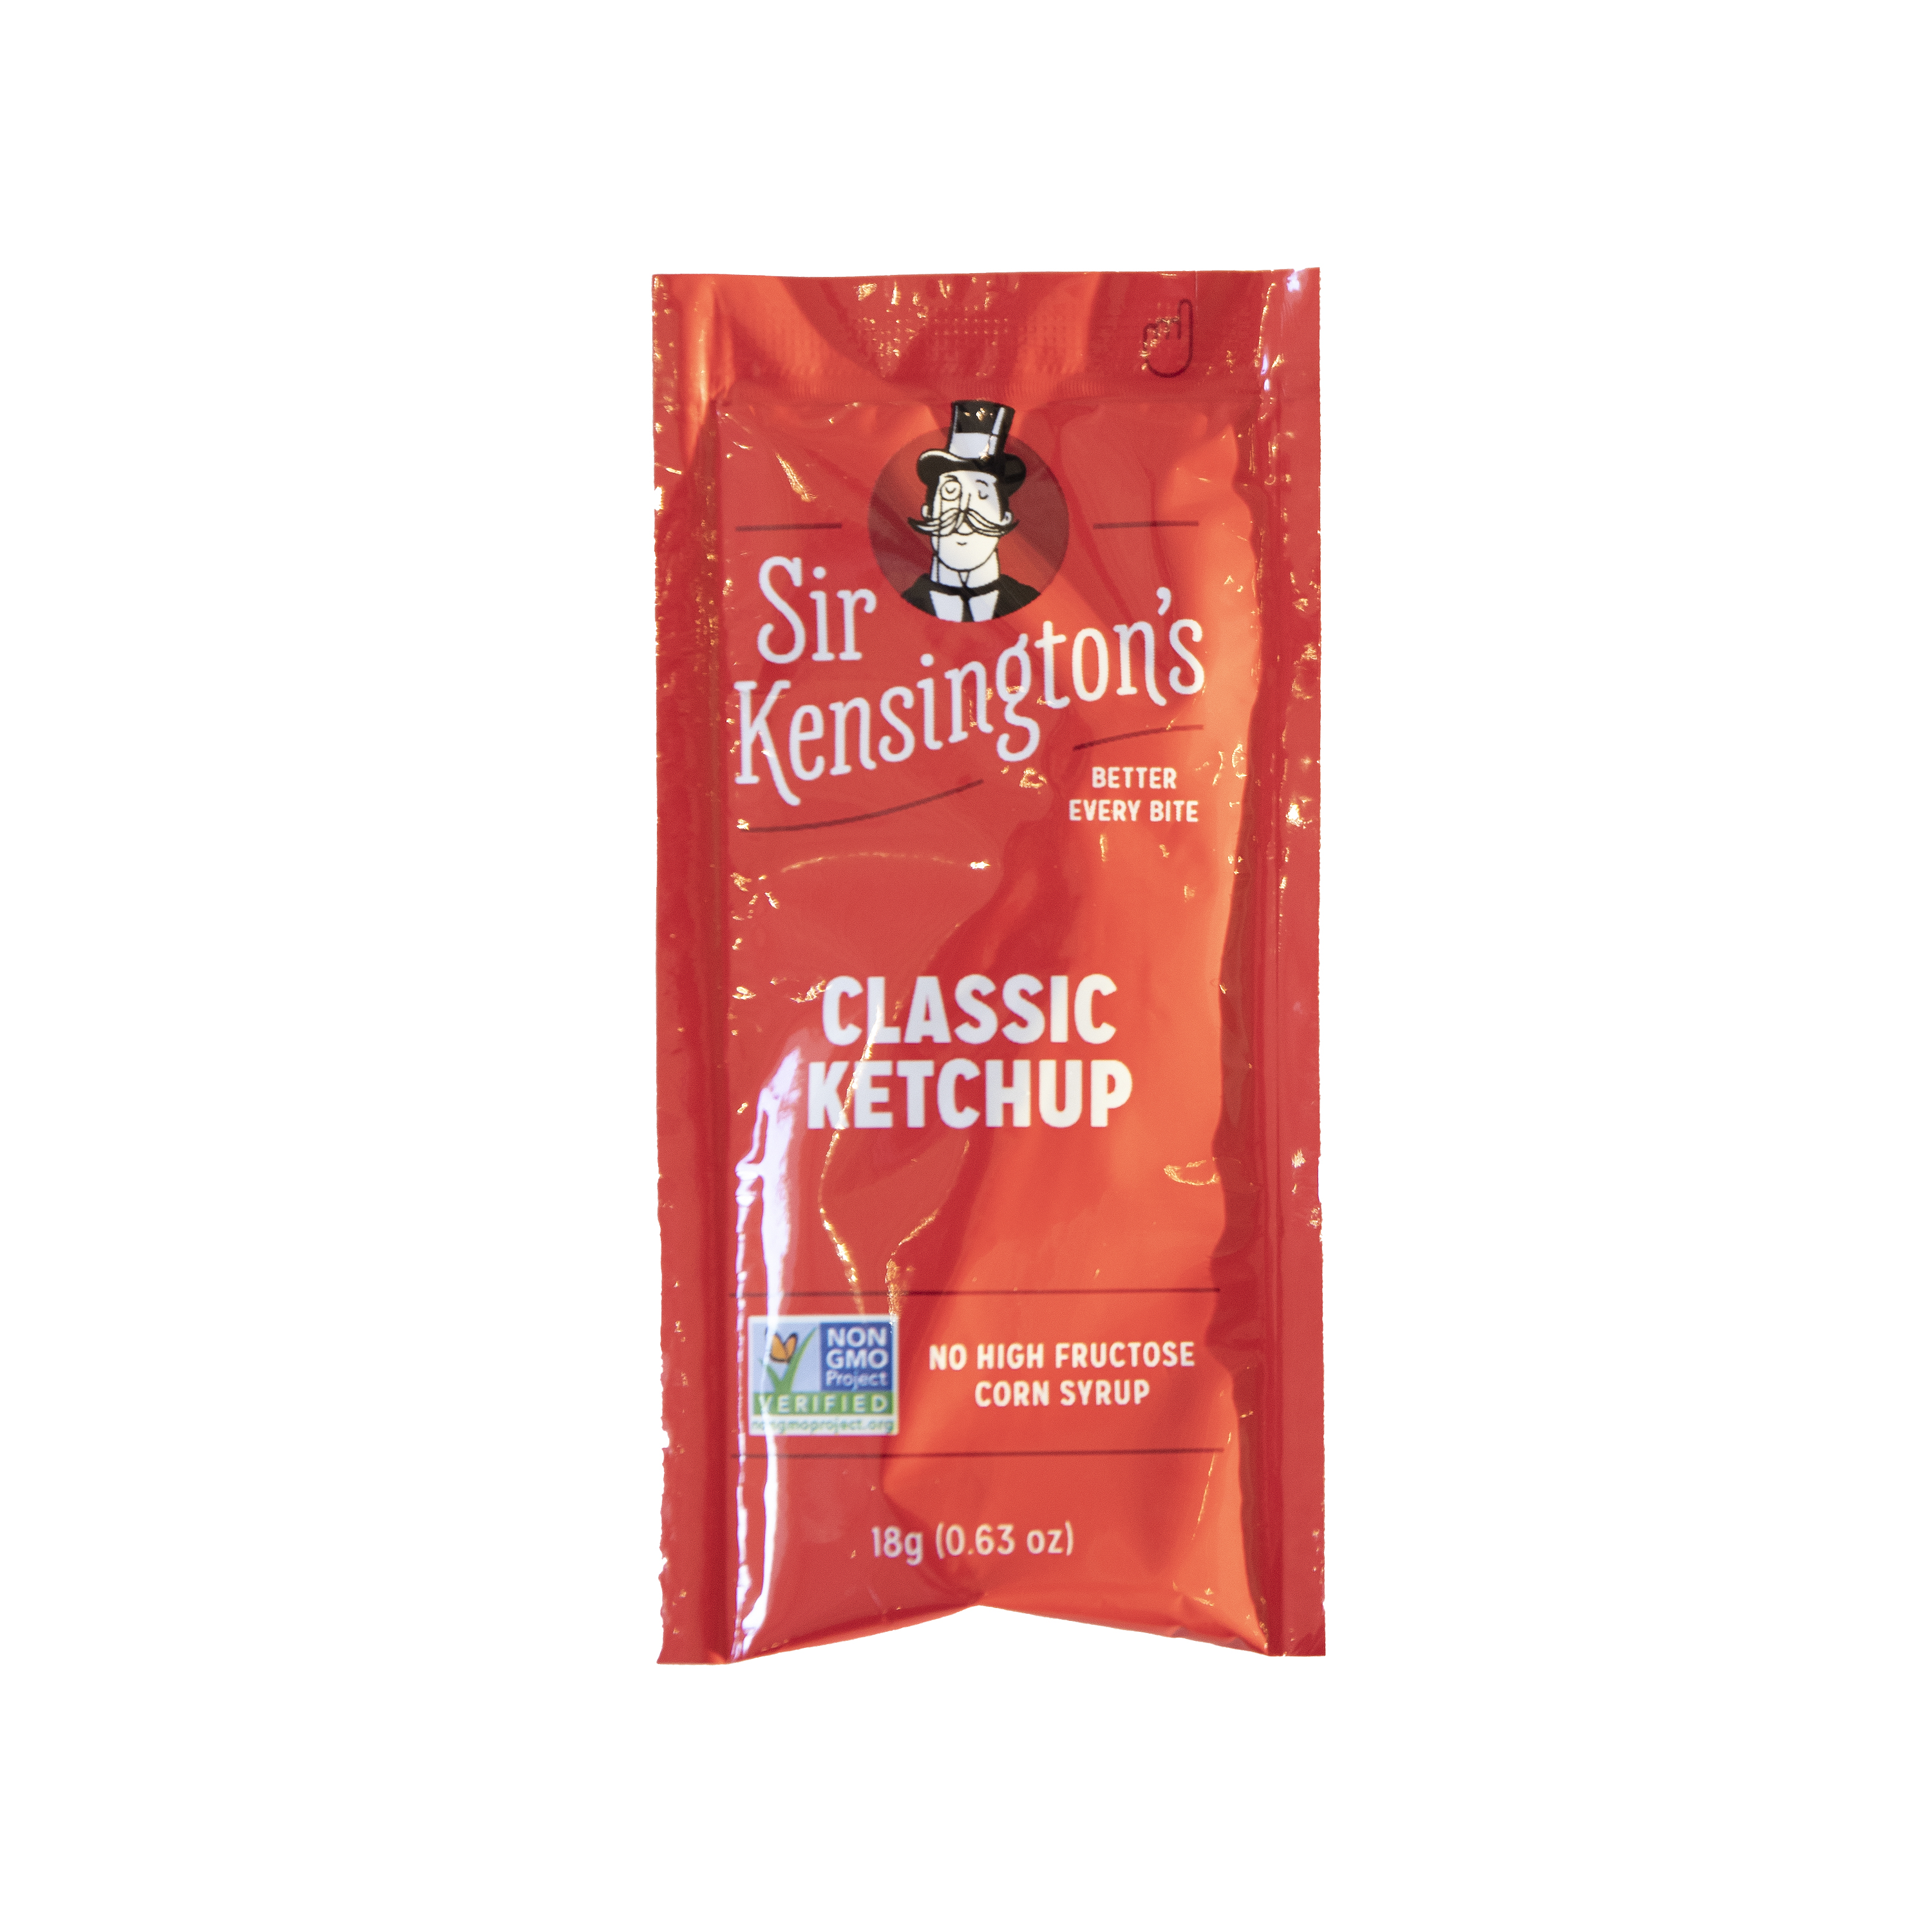 Red Gold Ketchup Packets (All Natural) - 1000/Case